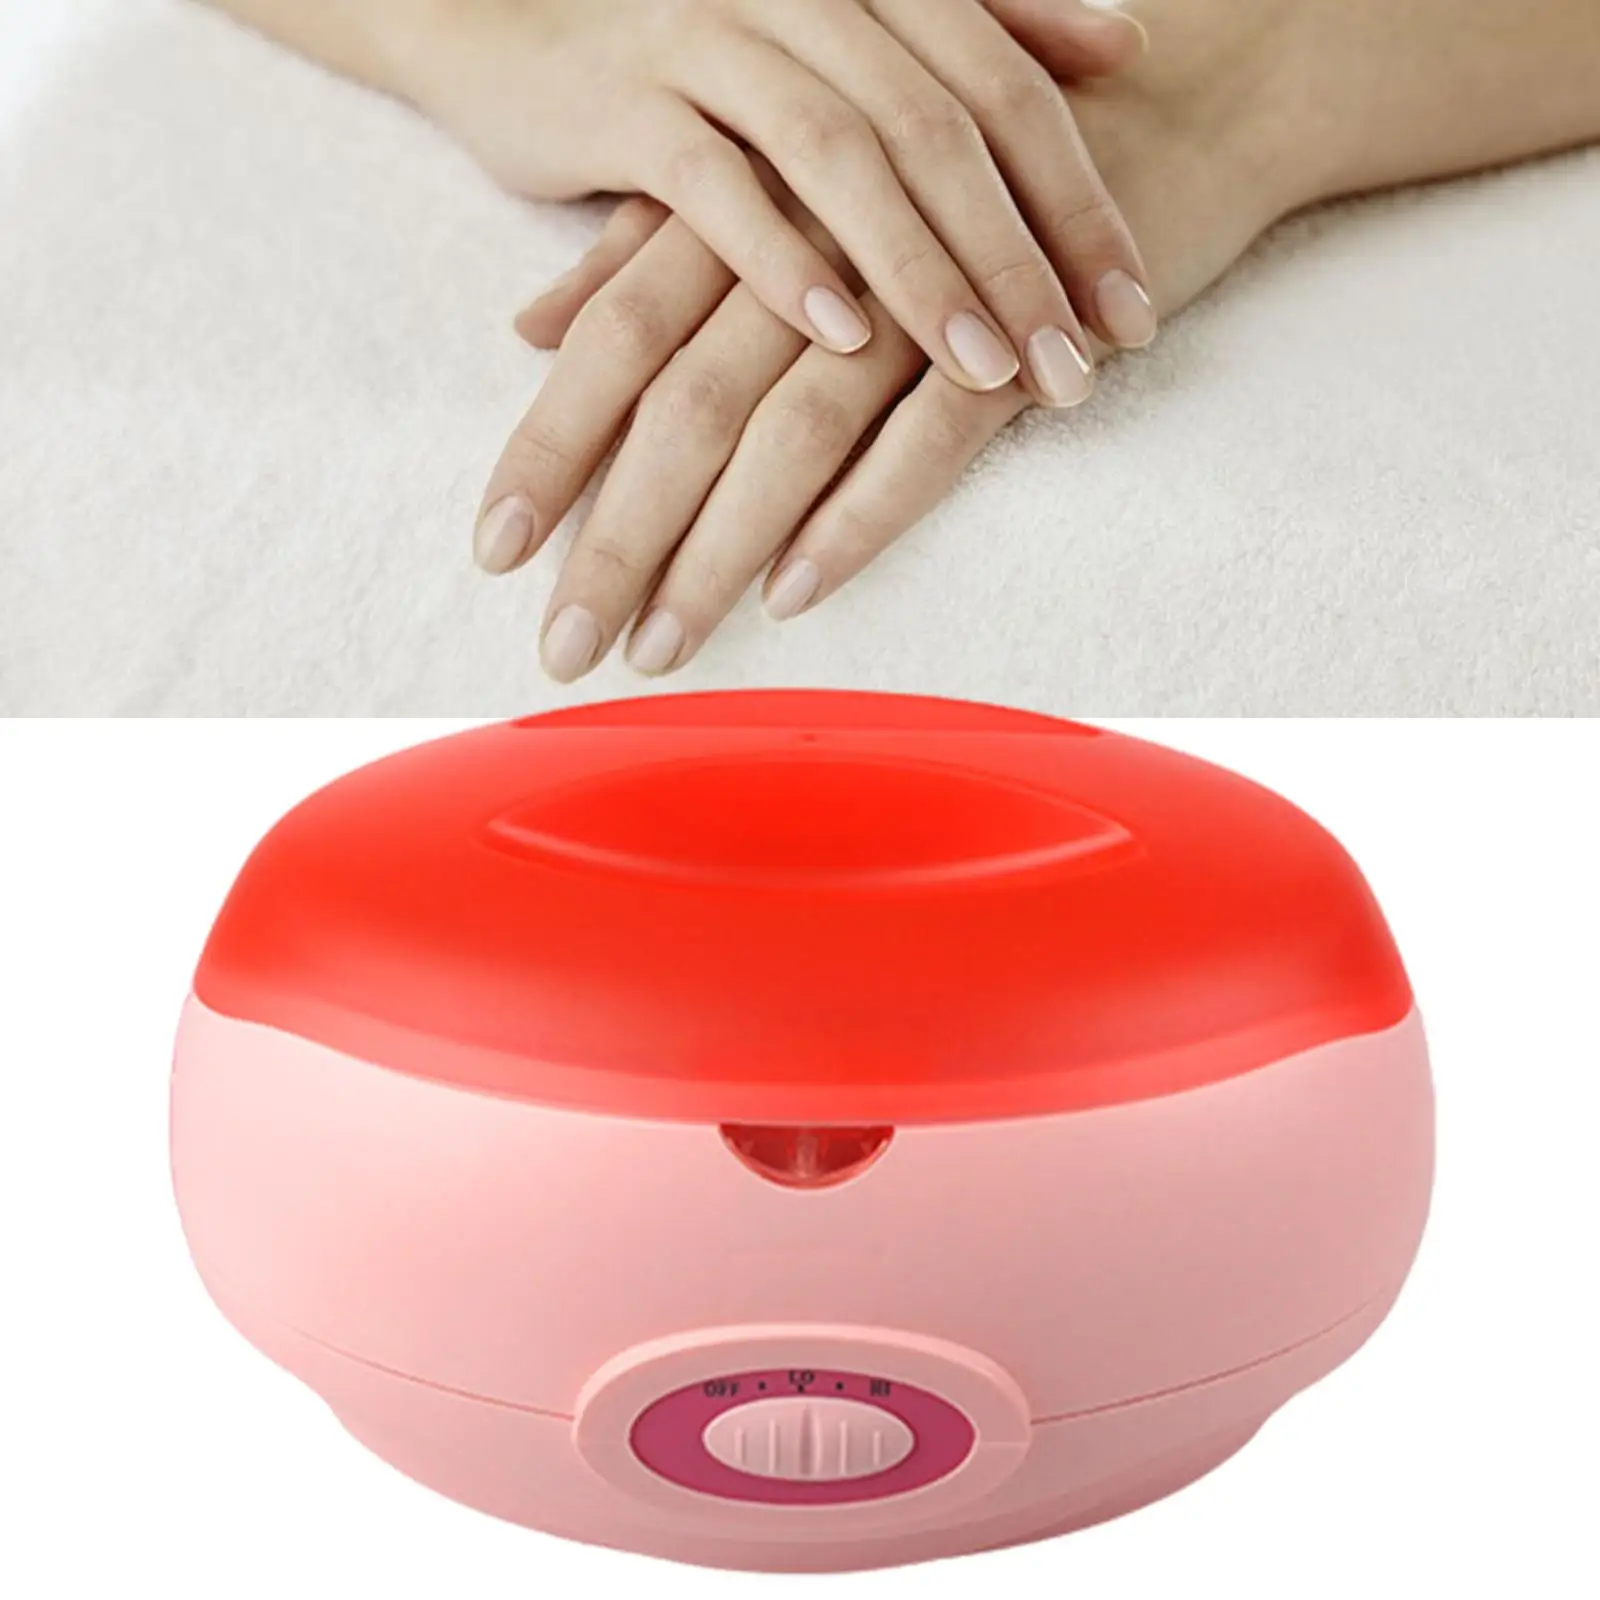   Machine for Hand and Feet Moisturizing  Salon SPA  Heater at Home with Lid   Bath Large Volume EU